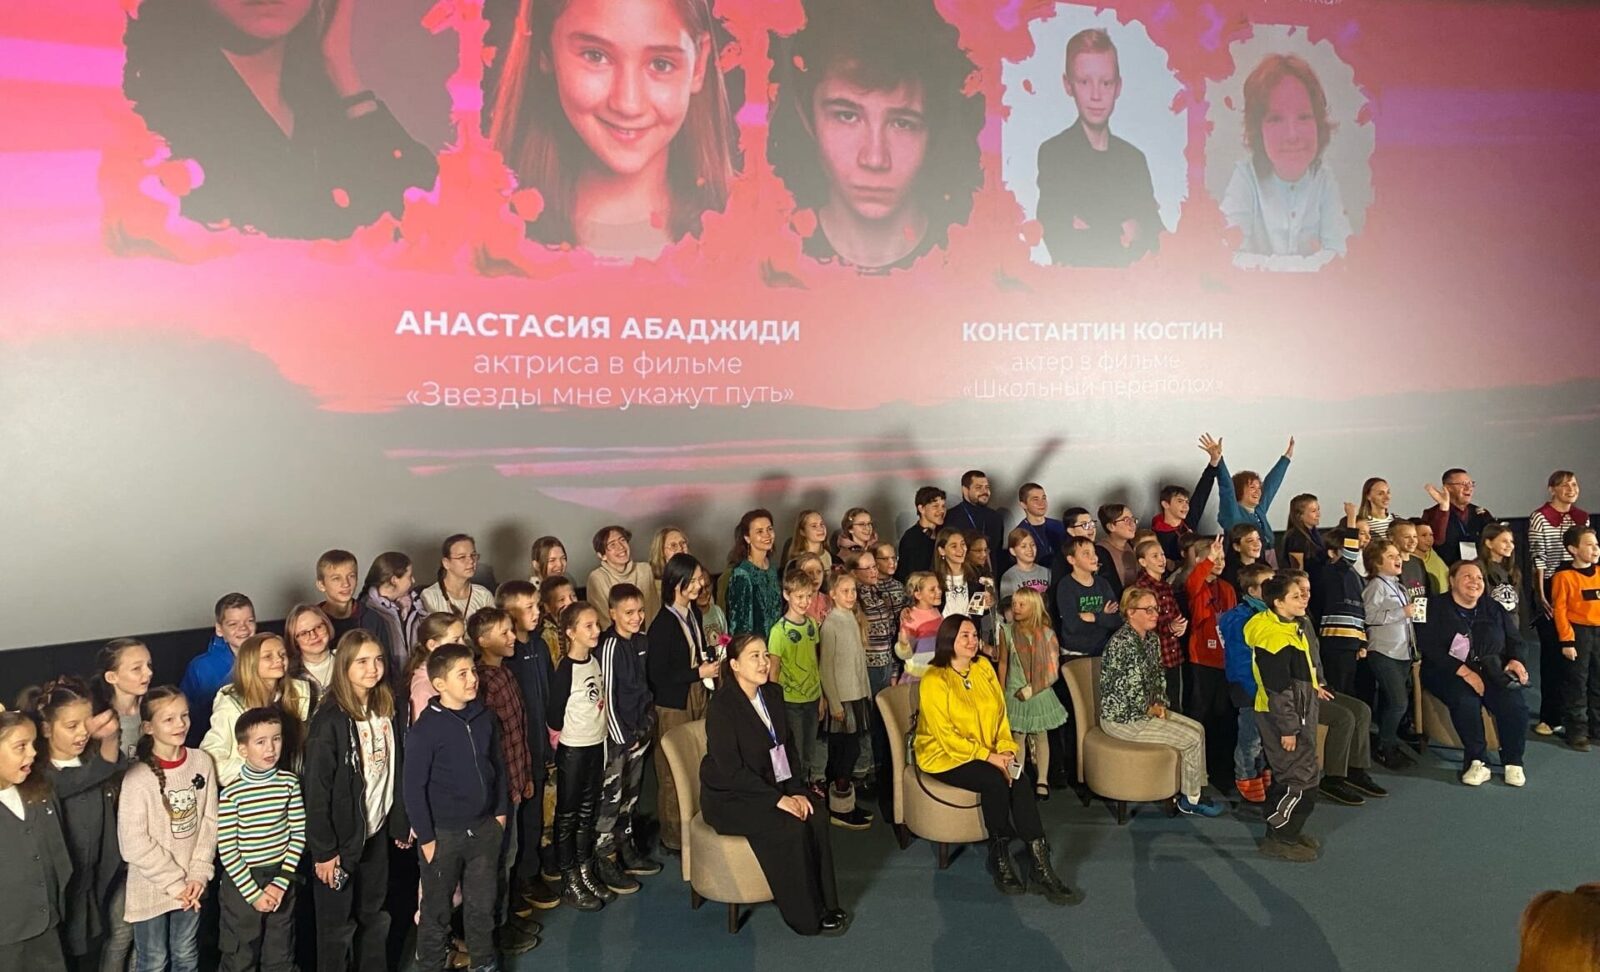 Session “CHILDREN IN THE RUSSIAN FILMMAKING”